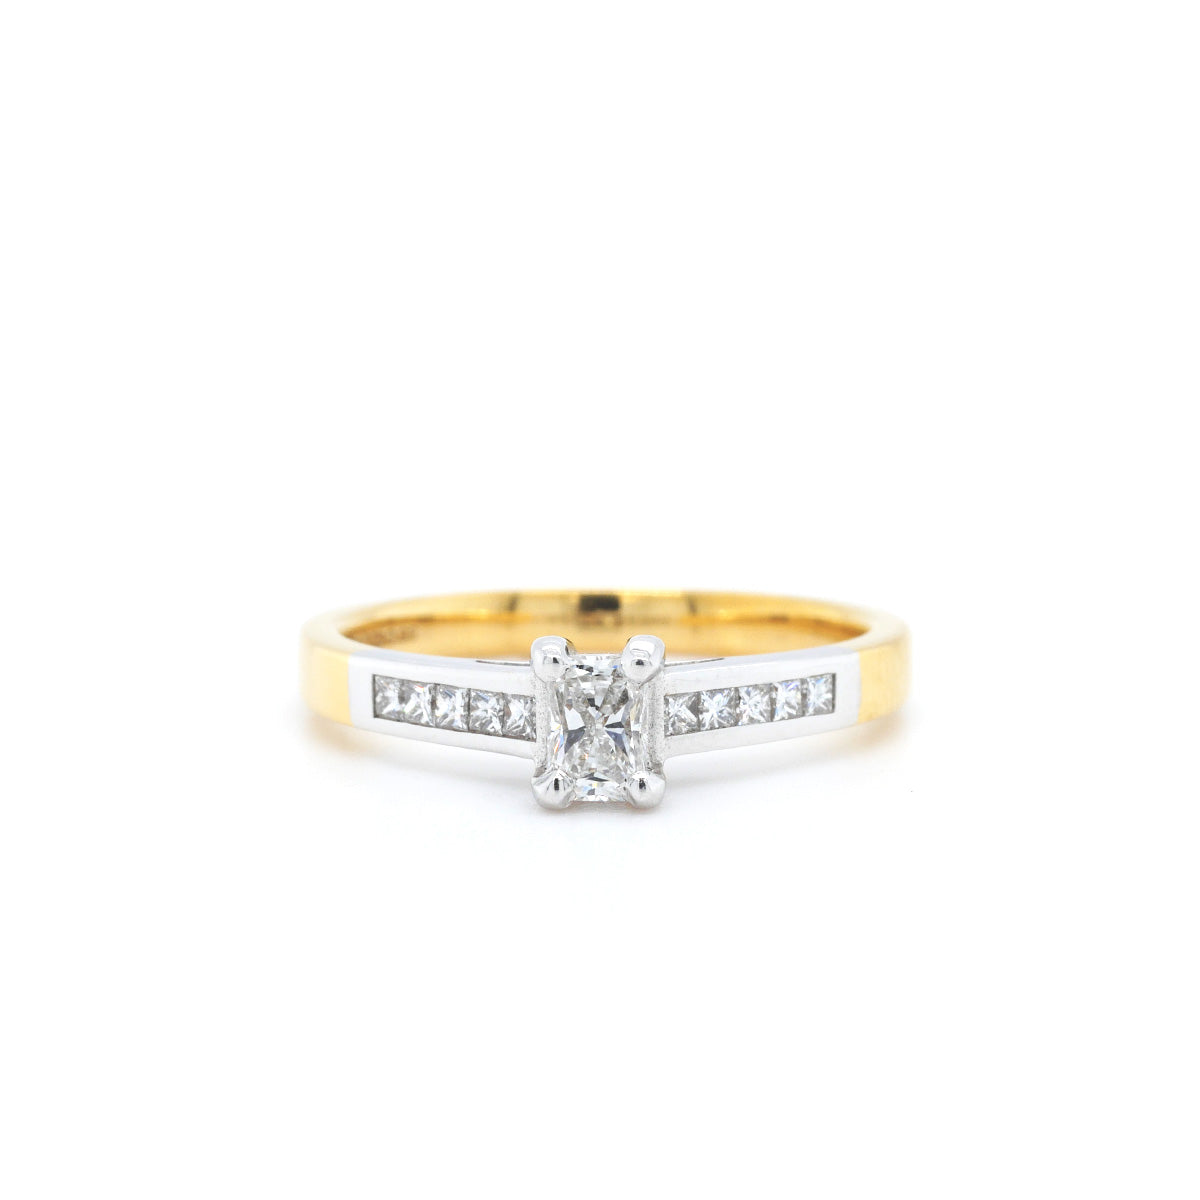 18ct Yellow & White Gold Shoulder Diamond Solitaire Ring - Size N